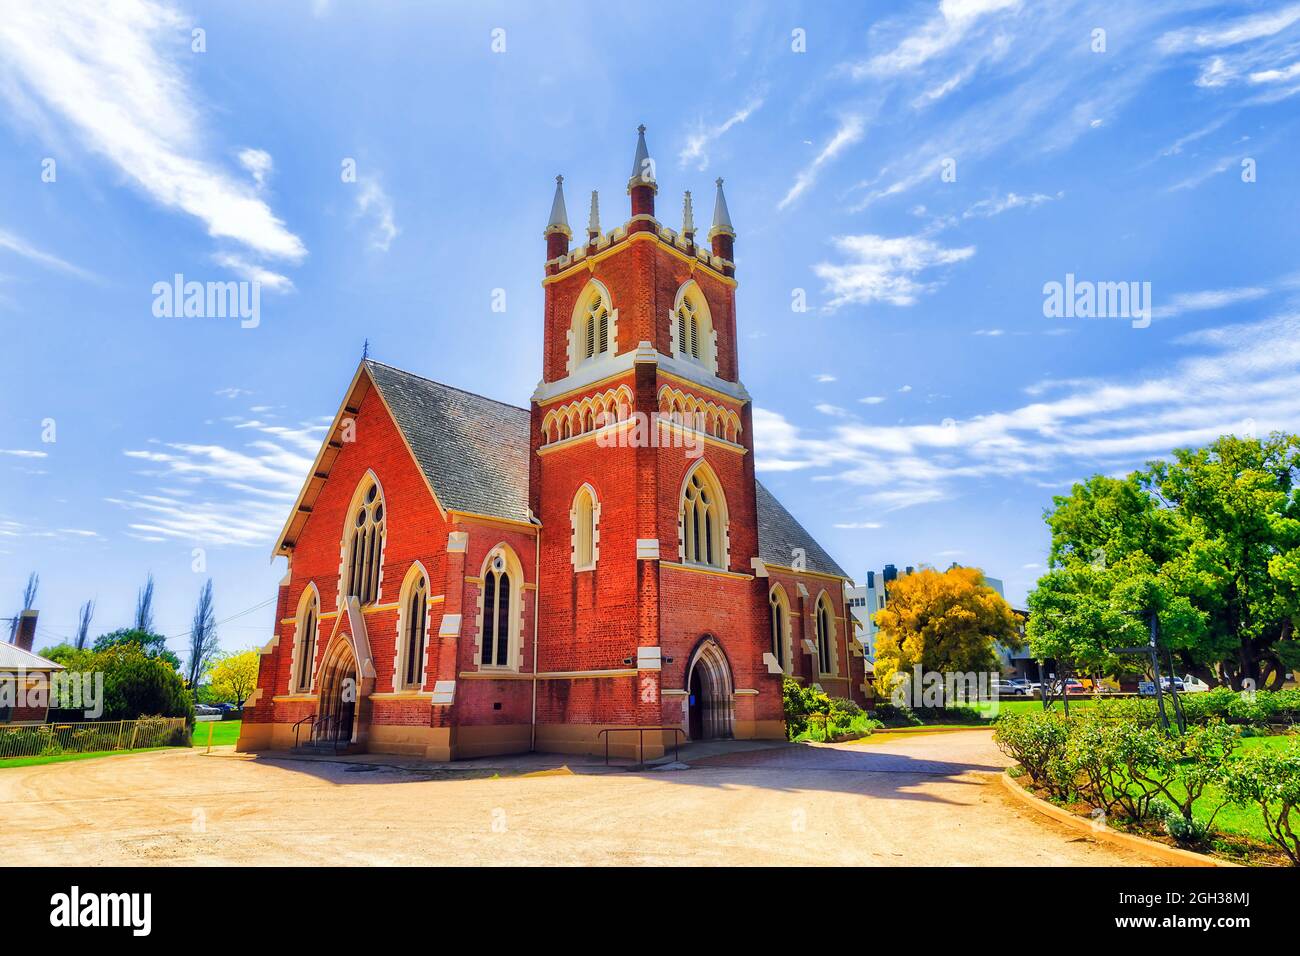 Historic heritage church building in the middle of public park in Mudgee town of Rural NSW, Australia. Stock Photo